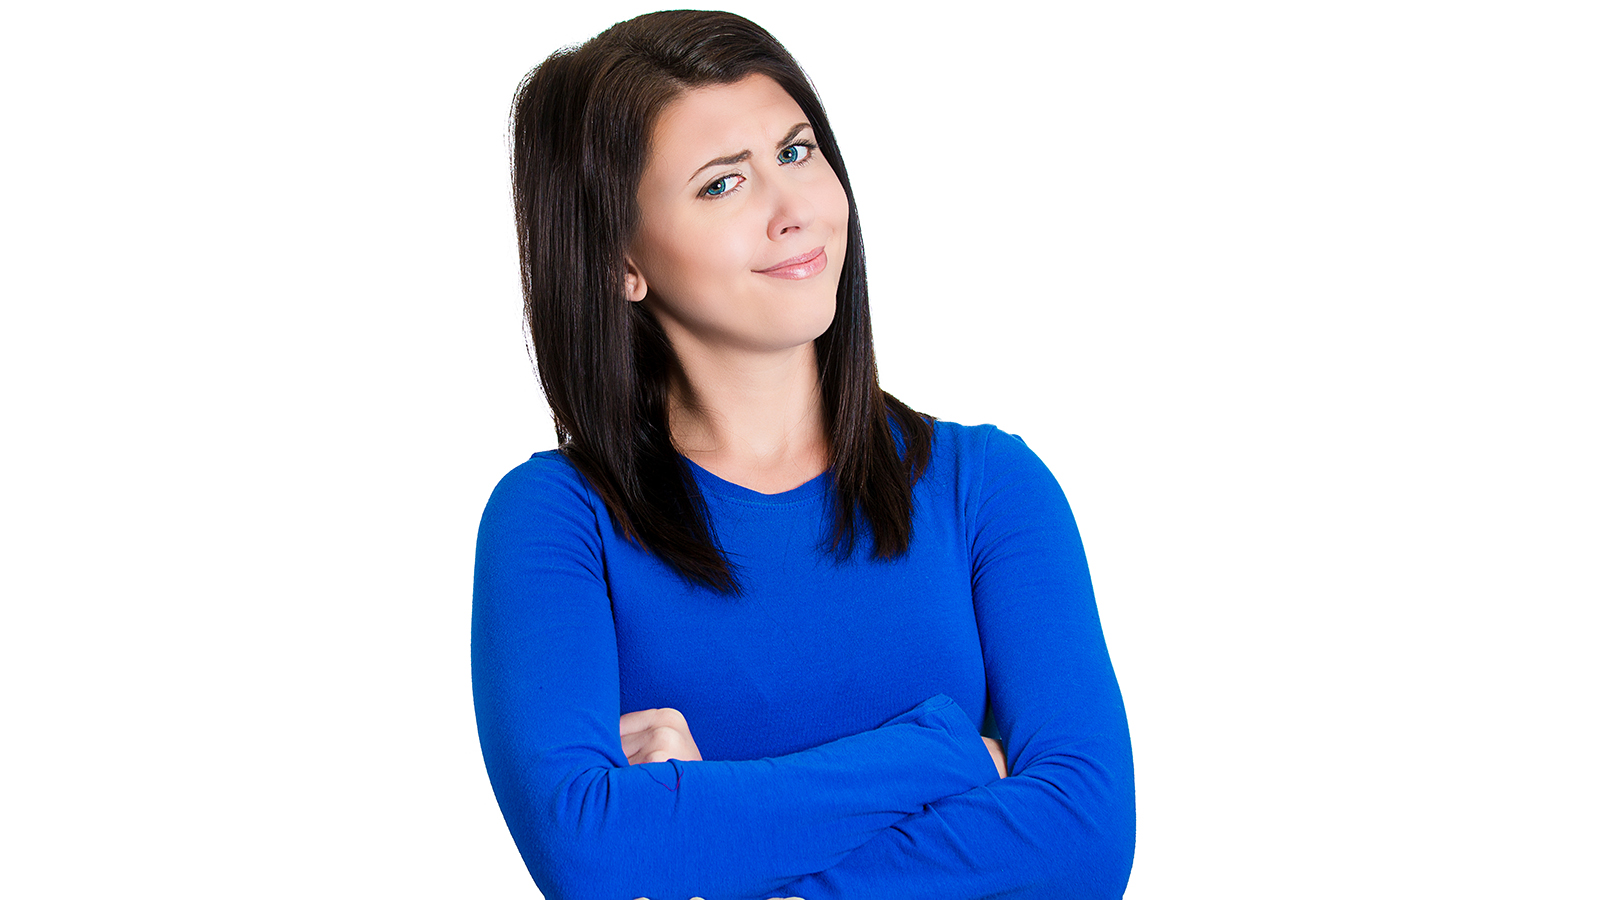 Closeup portrait of skeptical young lady, woman looking suspicious, some disgust on her face mixed with disapproval, isolated on white background. Negative human emotions, facial expressions, feelings